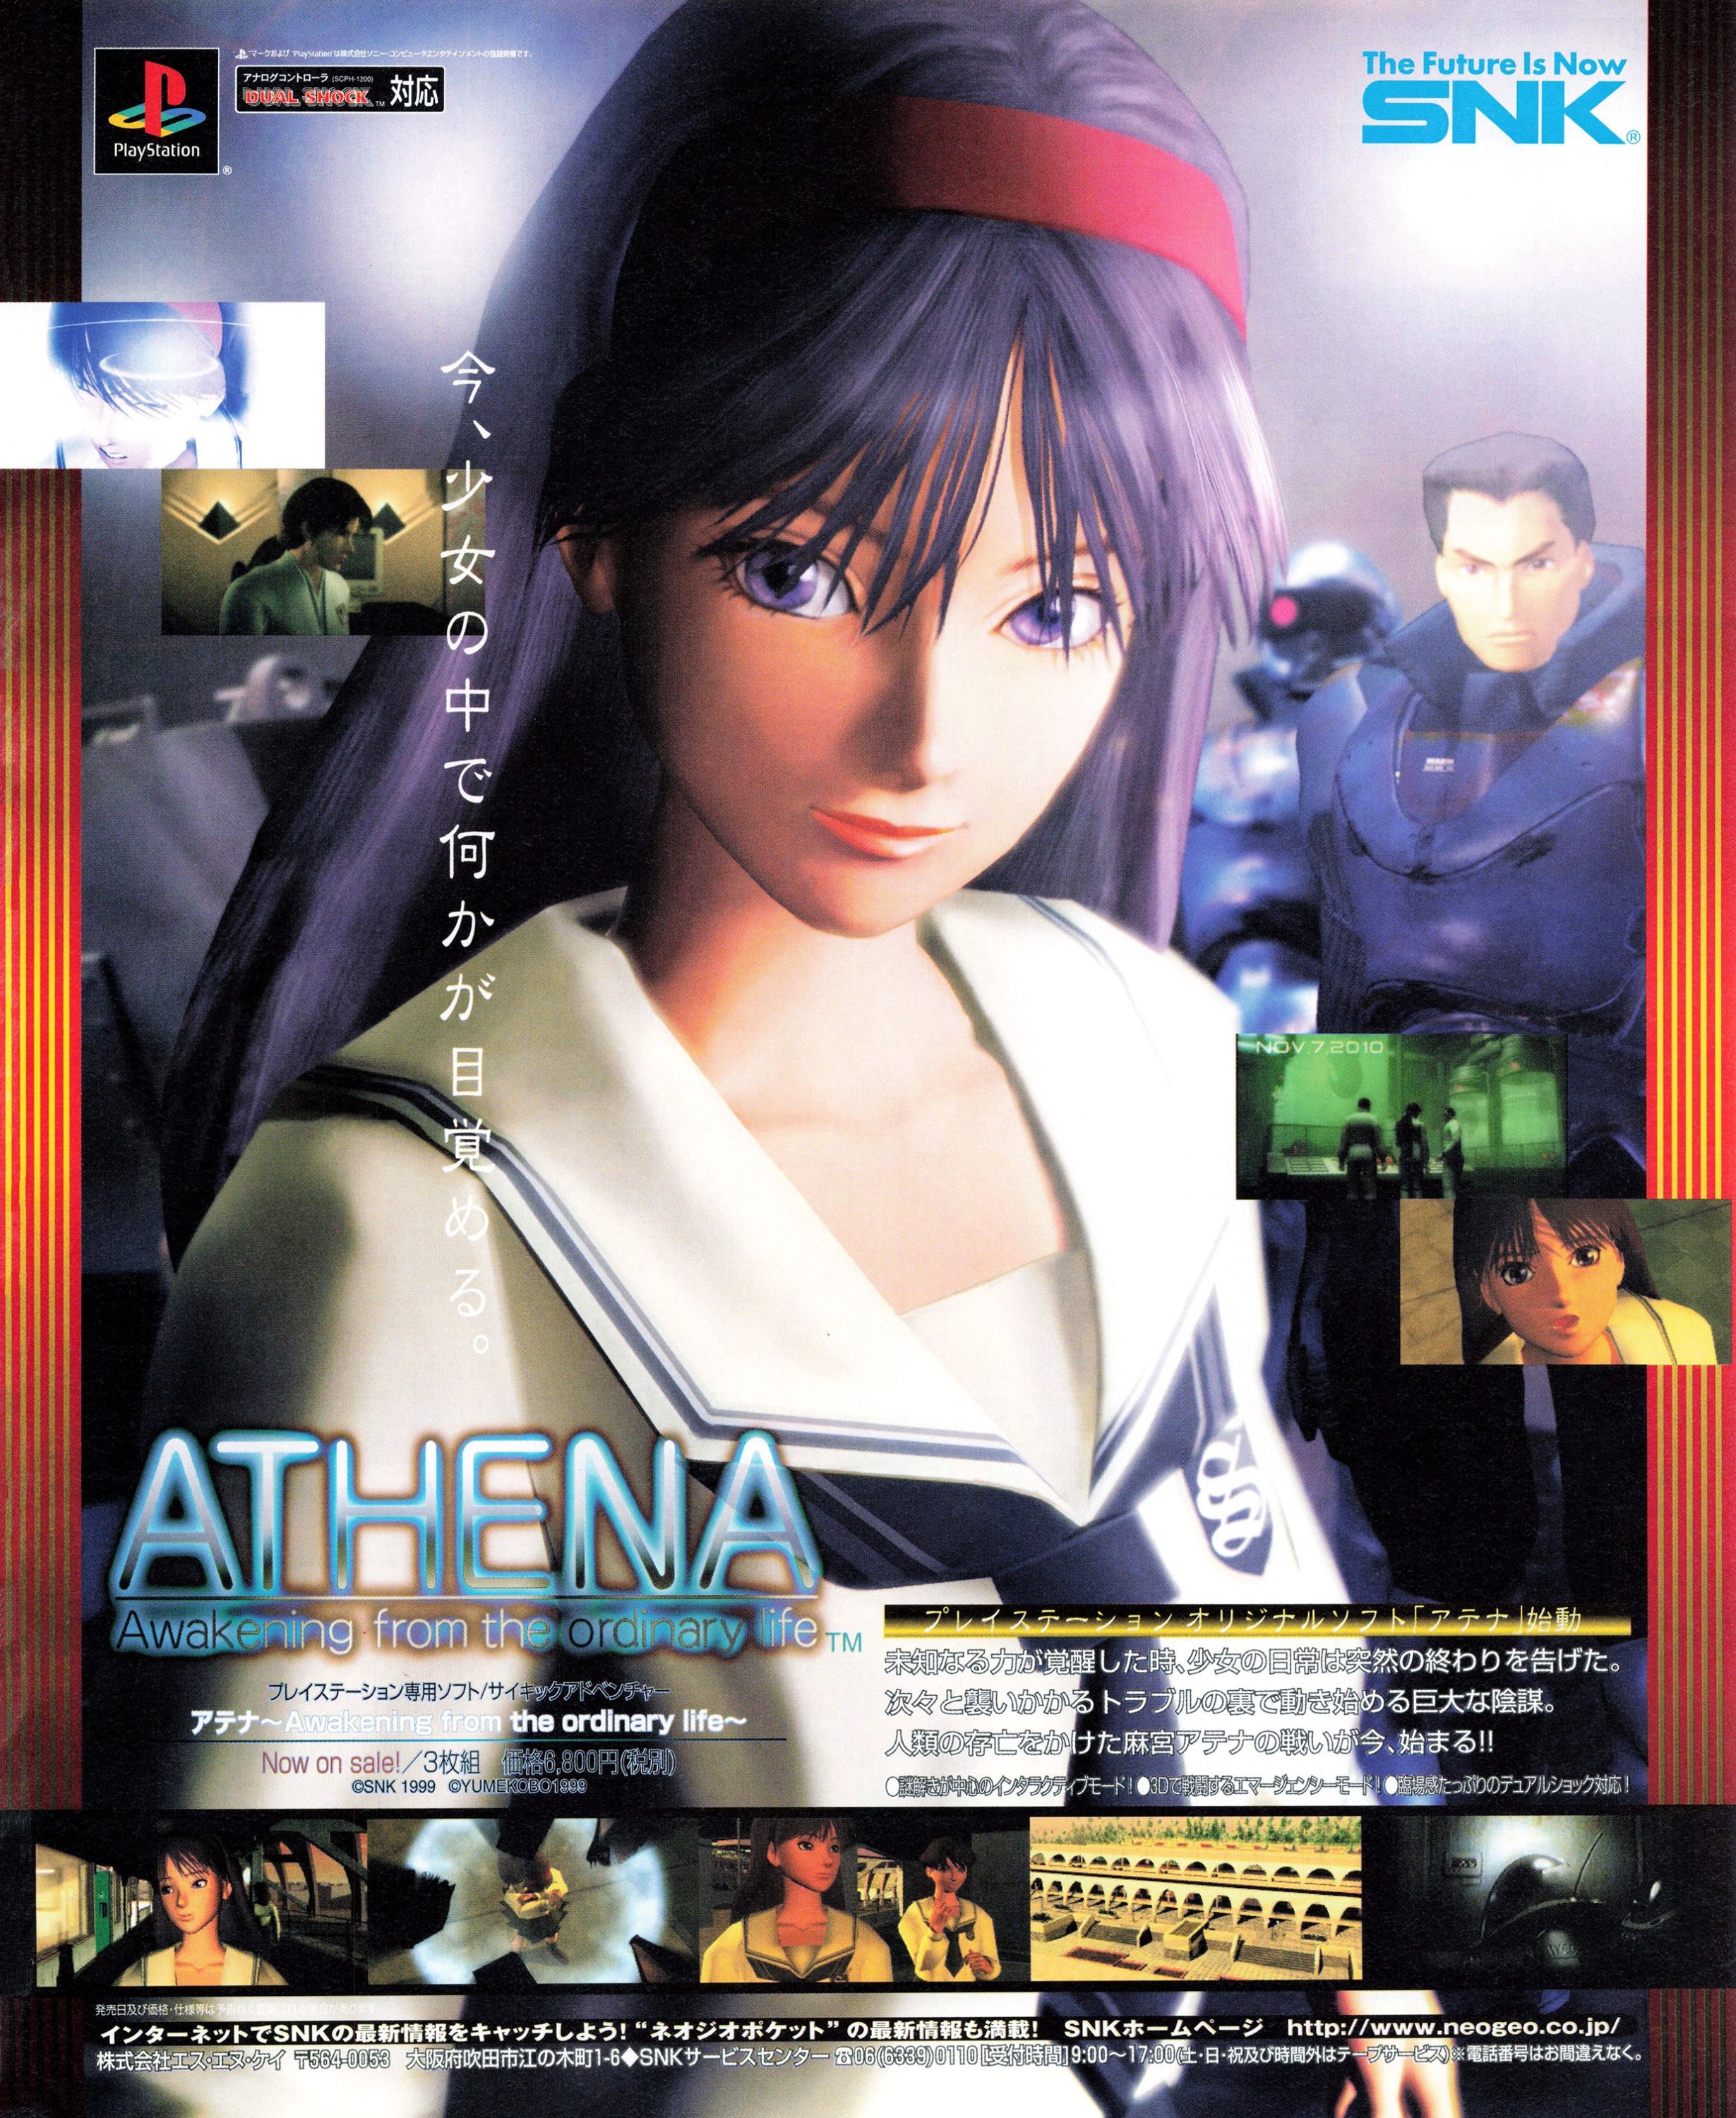 Athena: Awakening from the Ordinary Life (Japan) (March 1999) - A 